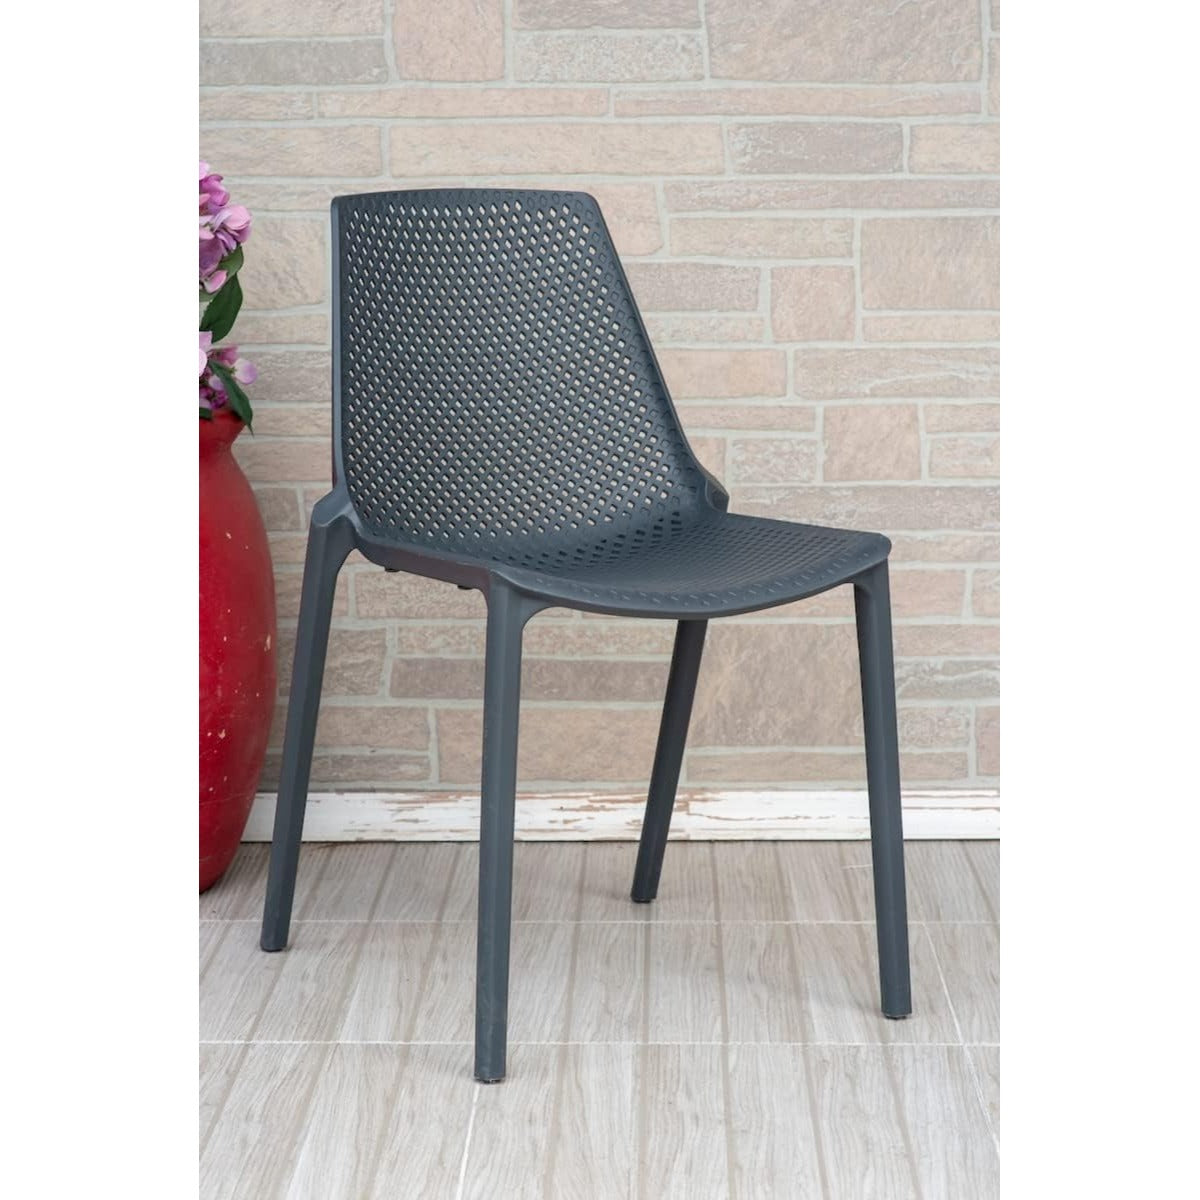 Amazonia Miami Patio Side Durable Outdoor and Indoor Resin Grey Chairs | Set of 4 - $195